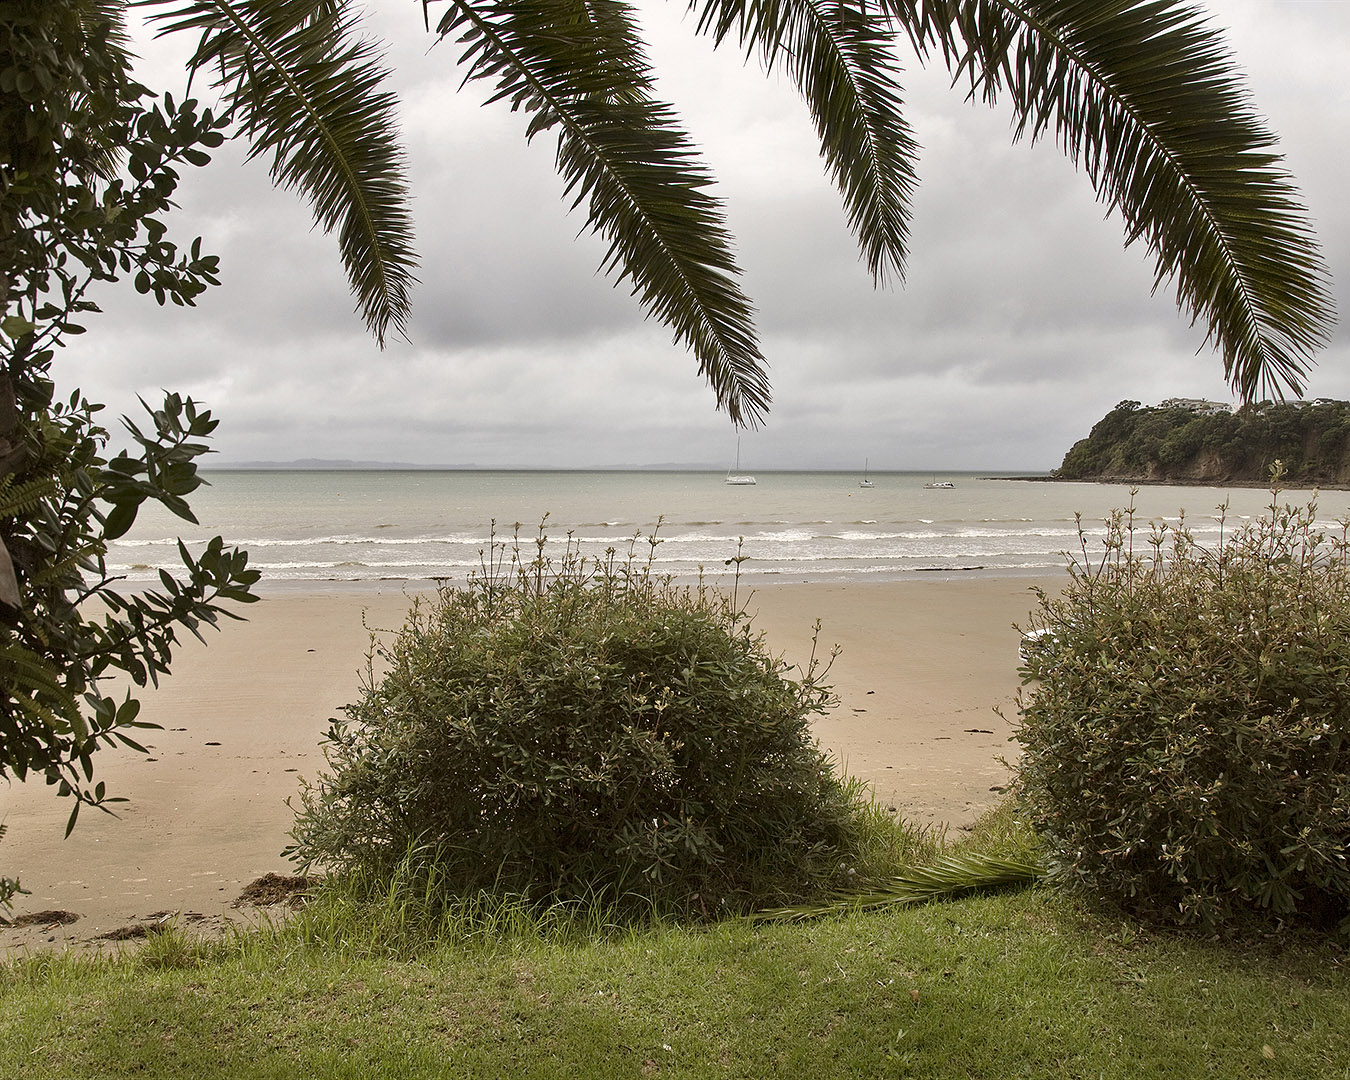 Stanmore Bay is seen from a grassy area with palm trees and greenery.